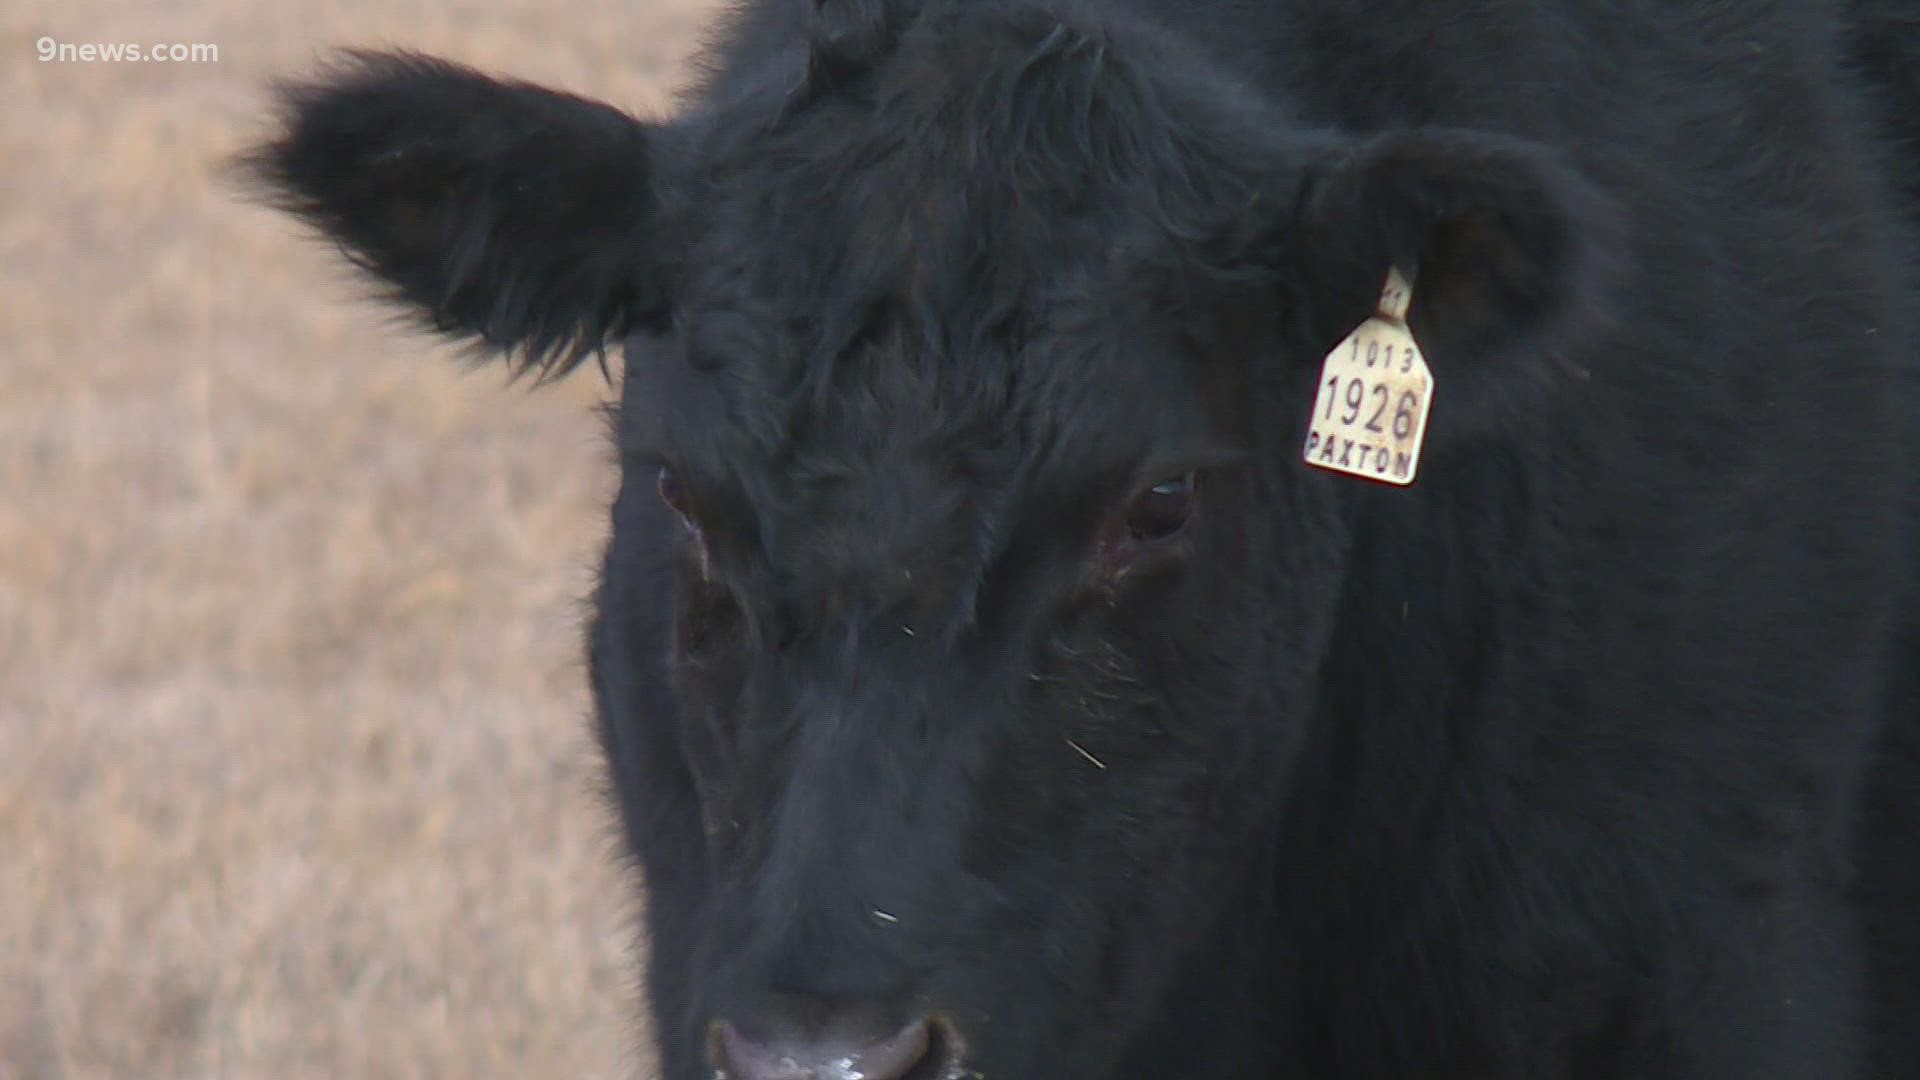 The Cattleman's Association said most of these back-ups are happening in Colorado's smaller food processing companies, with problems including COVID and staffing.